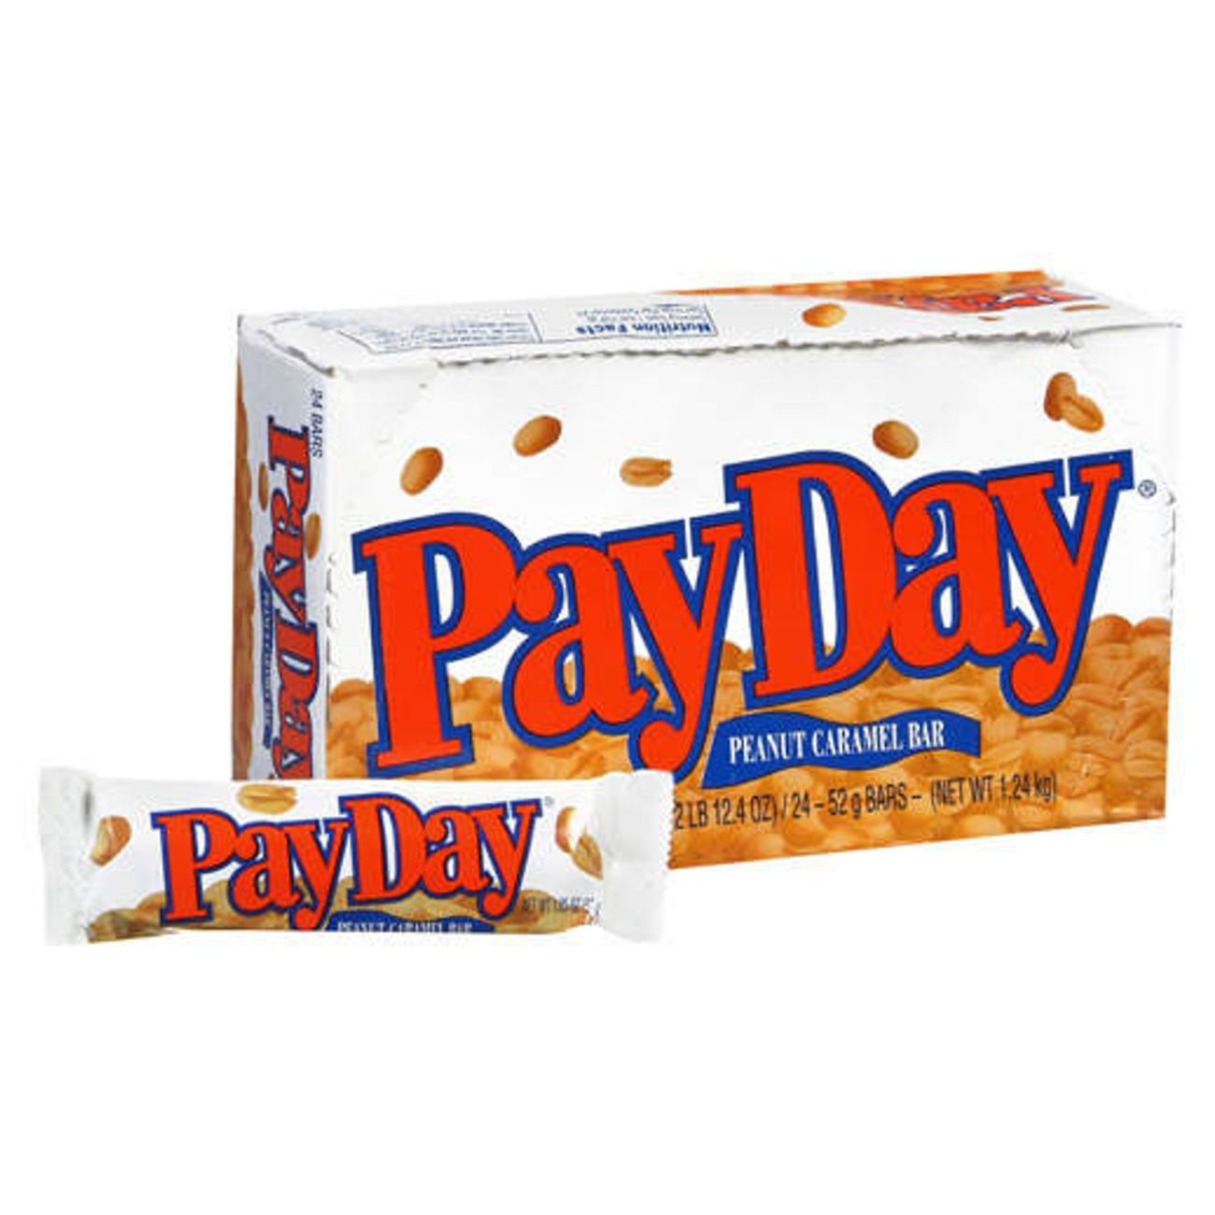 PayDay Candy Bar 1.85oz - 24ct